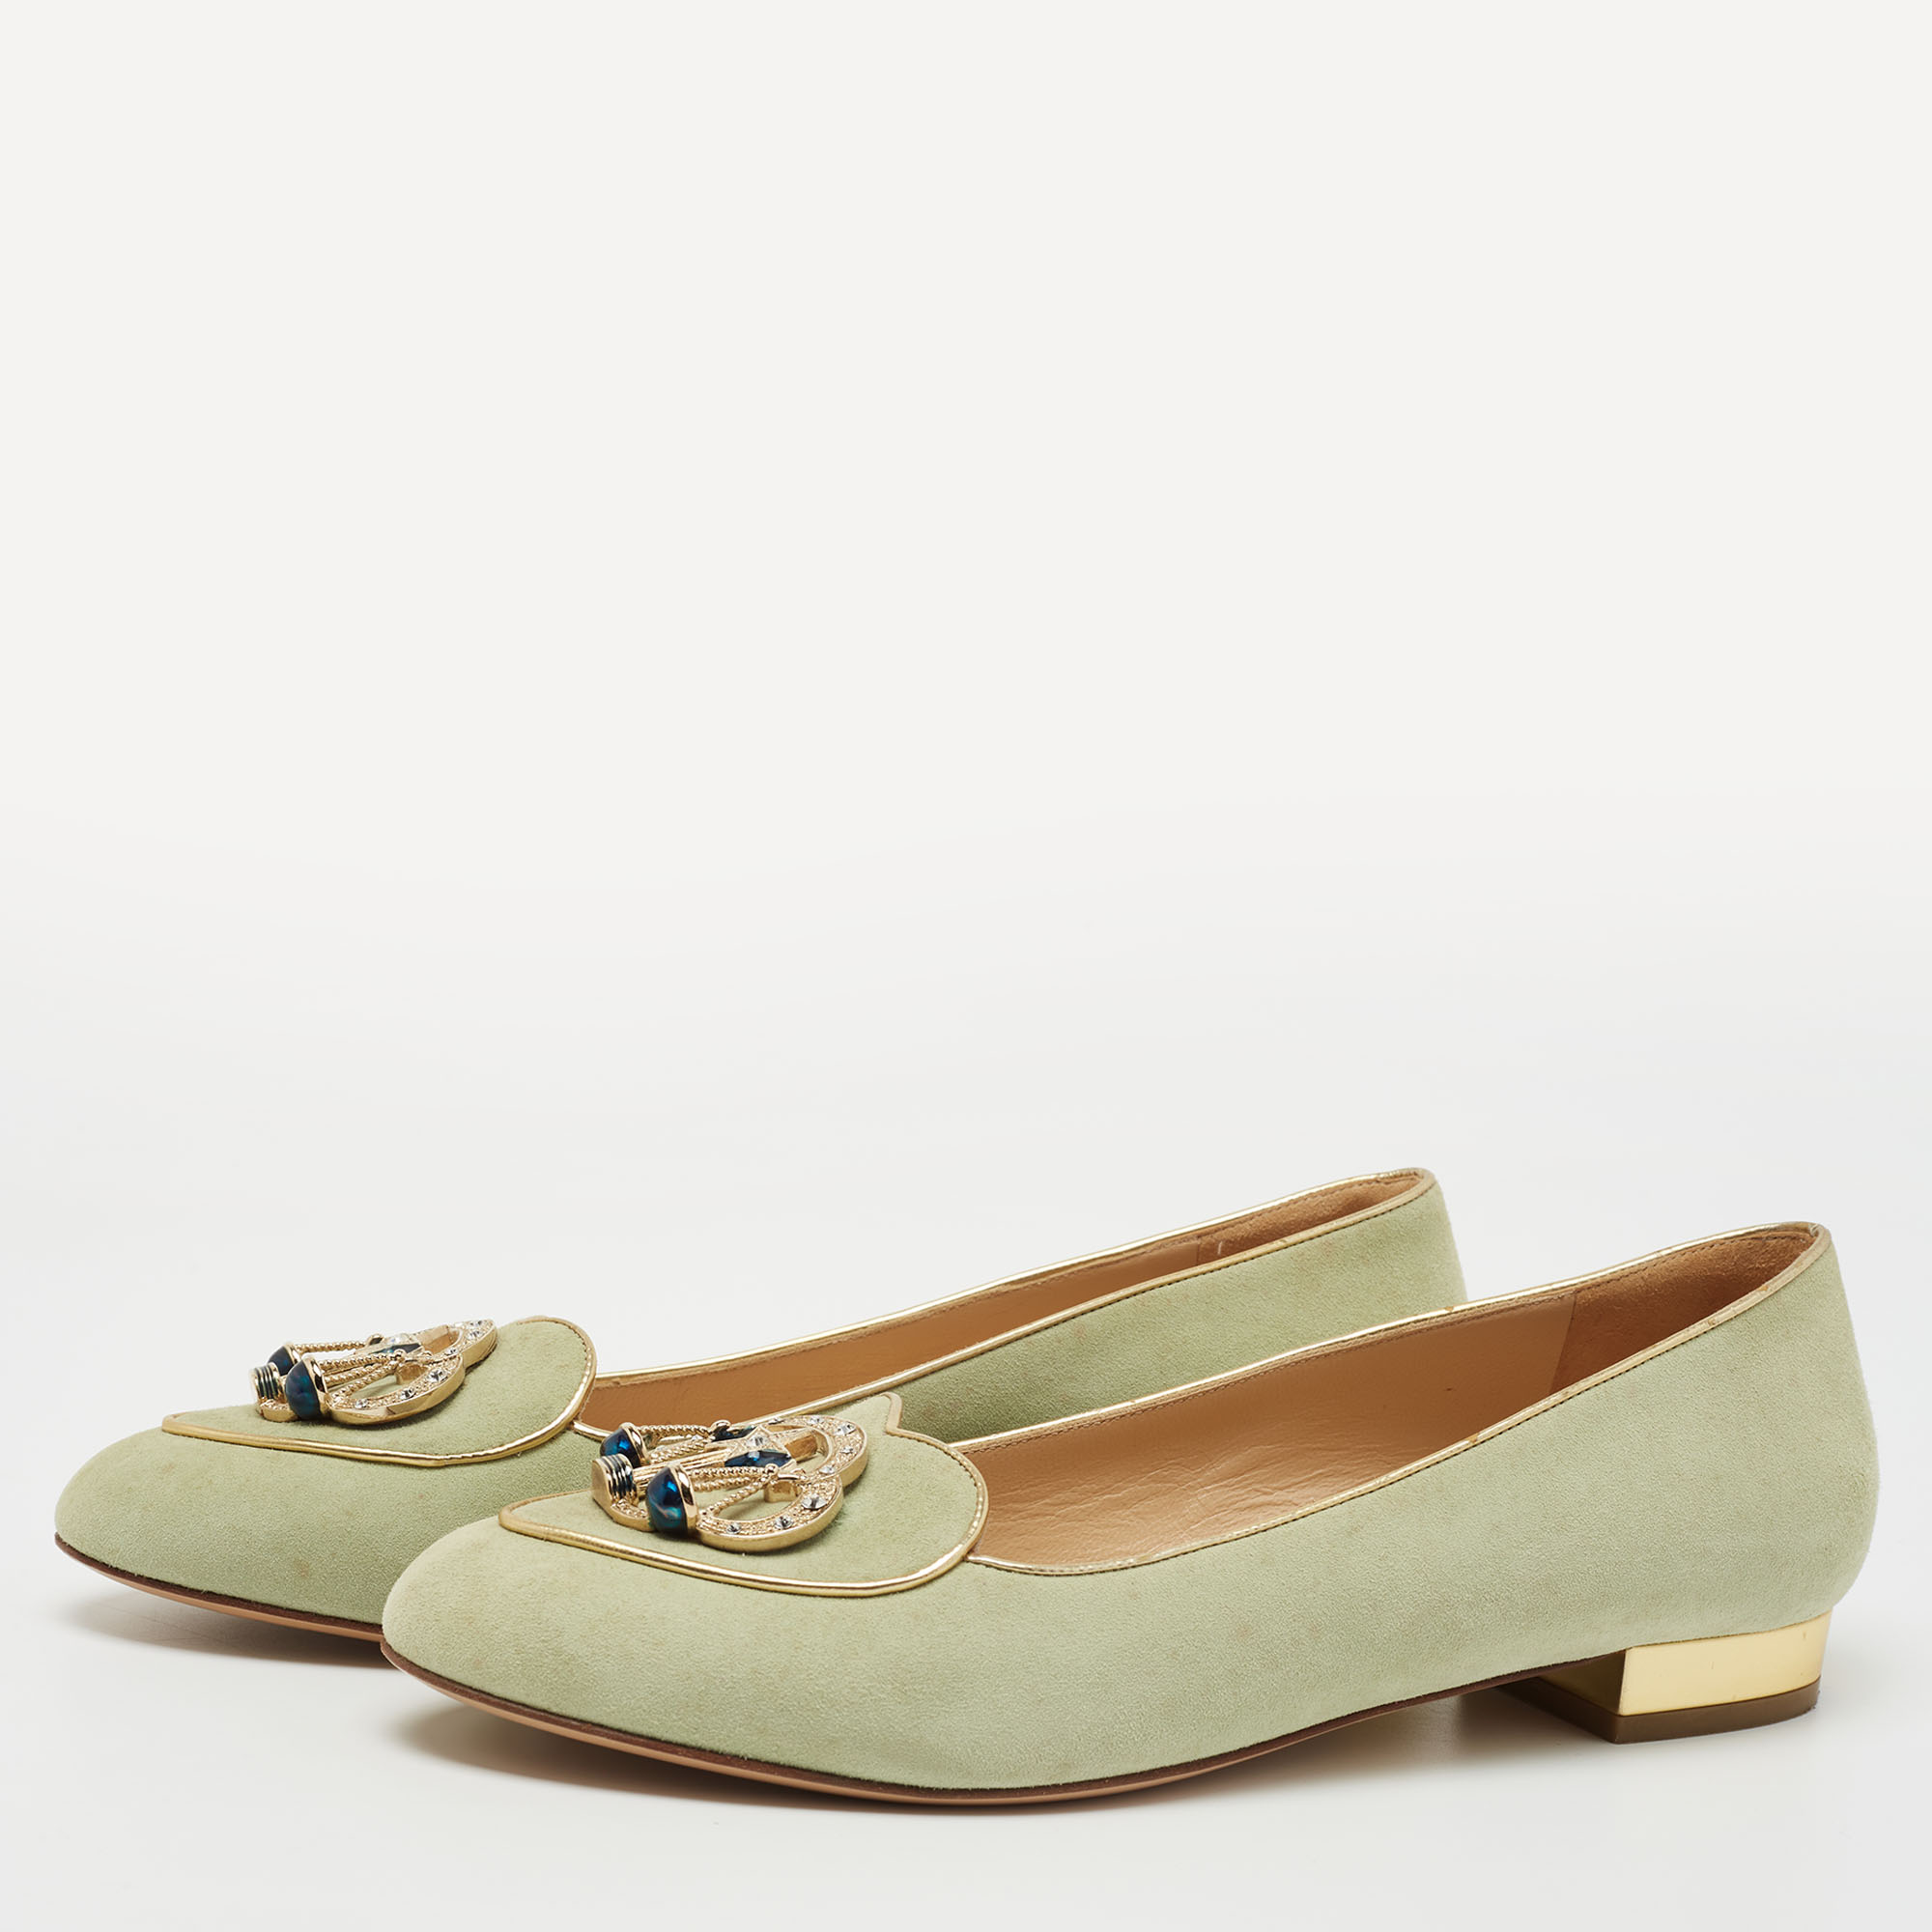 

Charlotte Olympia Mint Green Suede Gemini Smoking Slippers Size